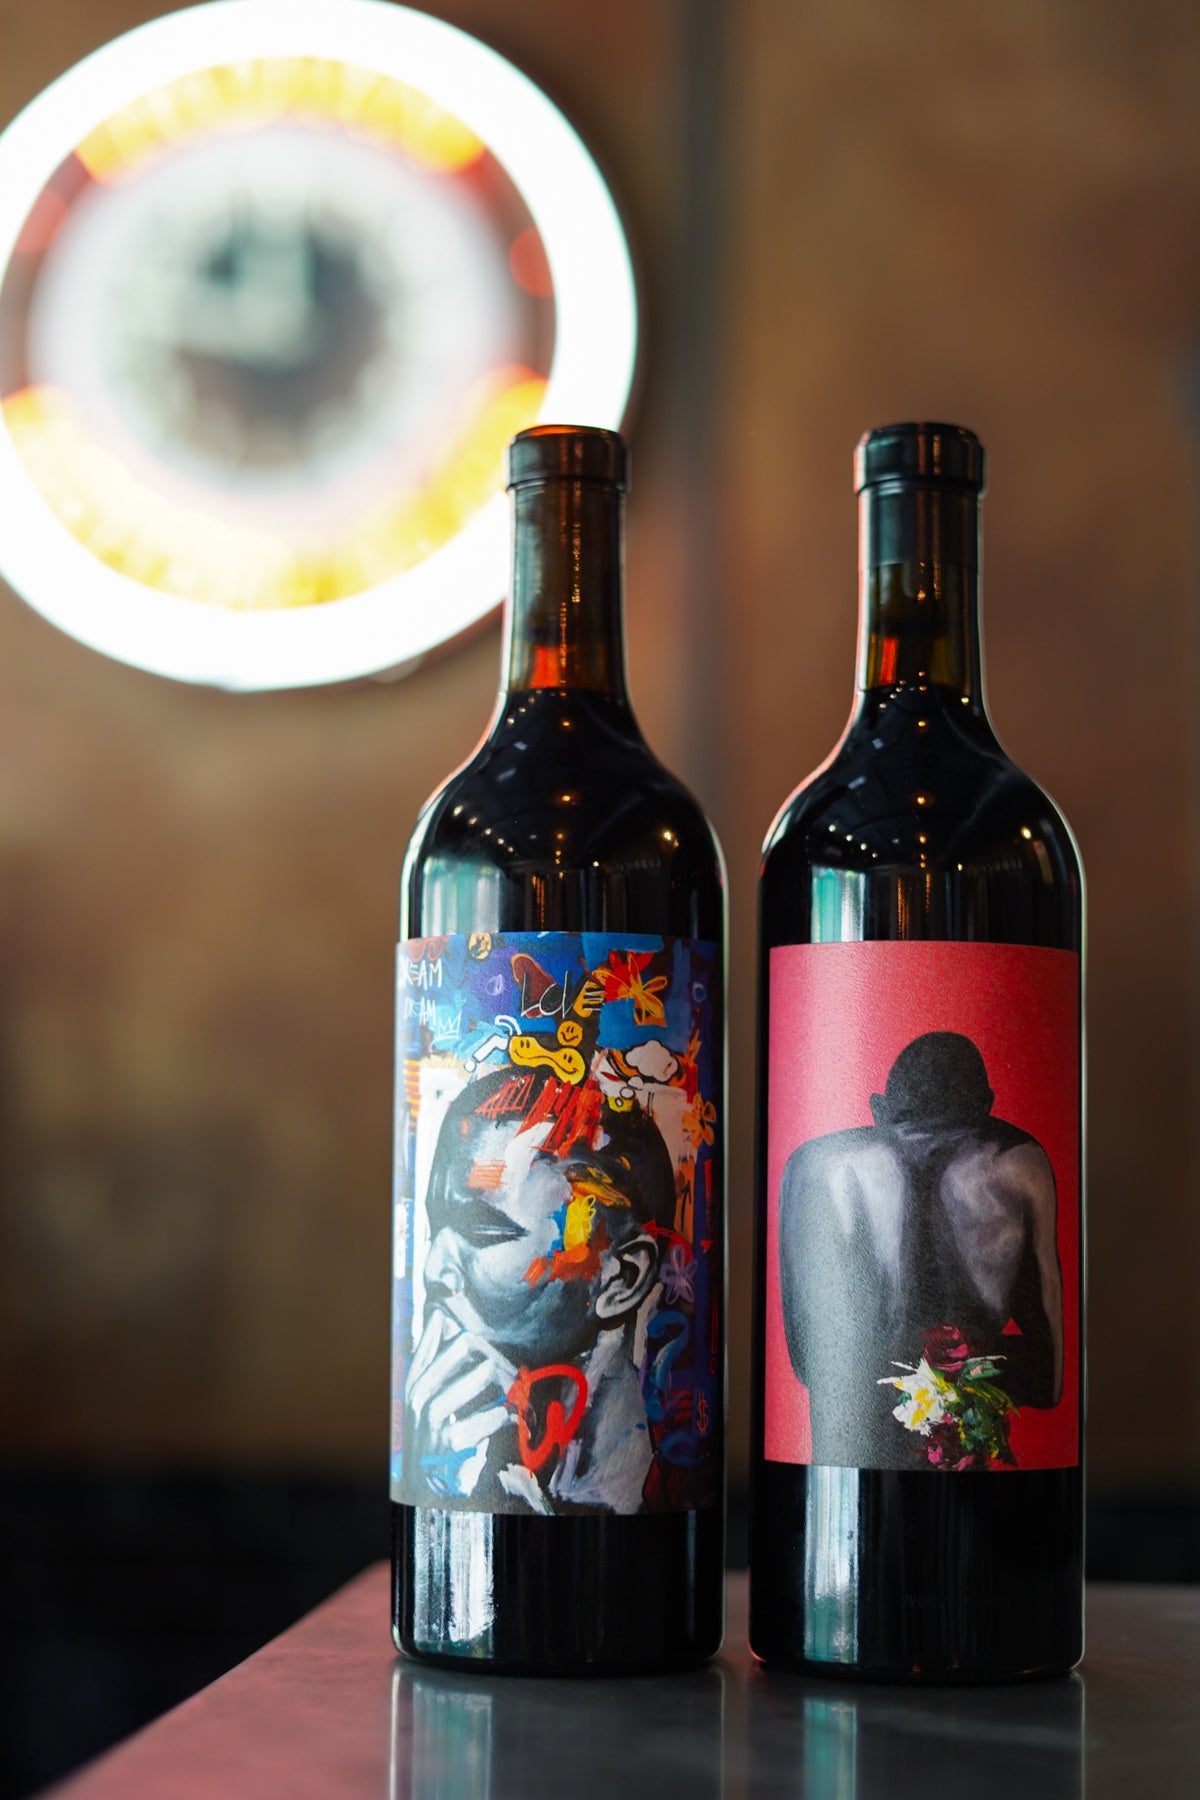 Dwight White II Brings Awareness To The Wine Industry Through Art